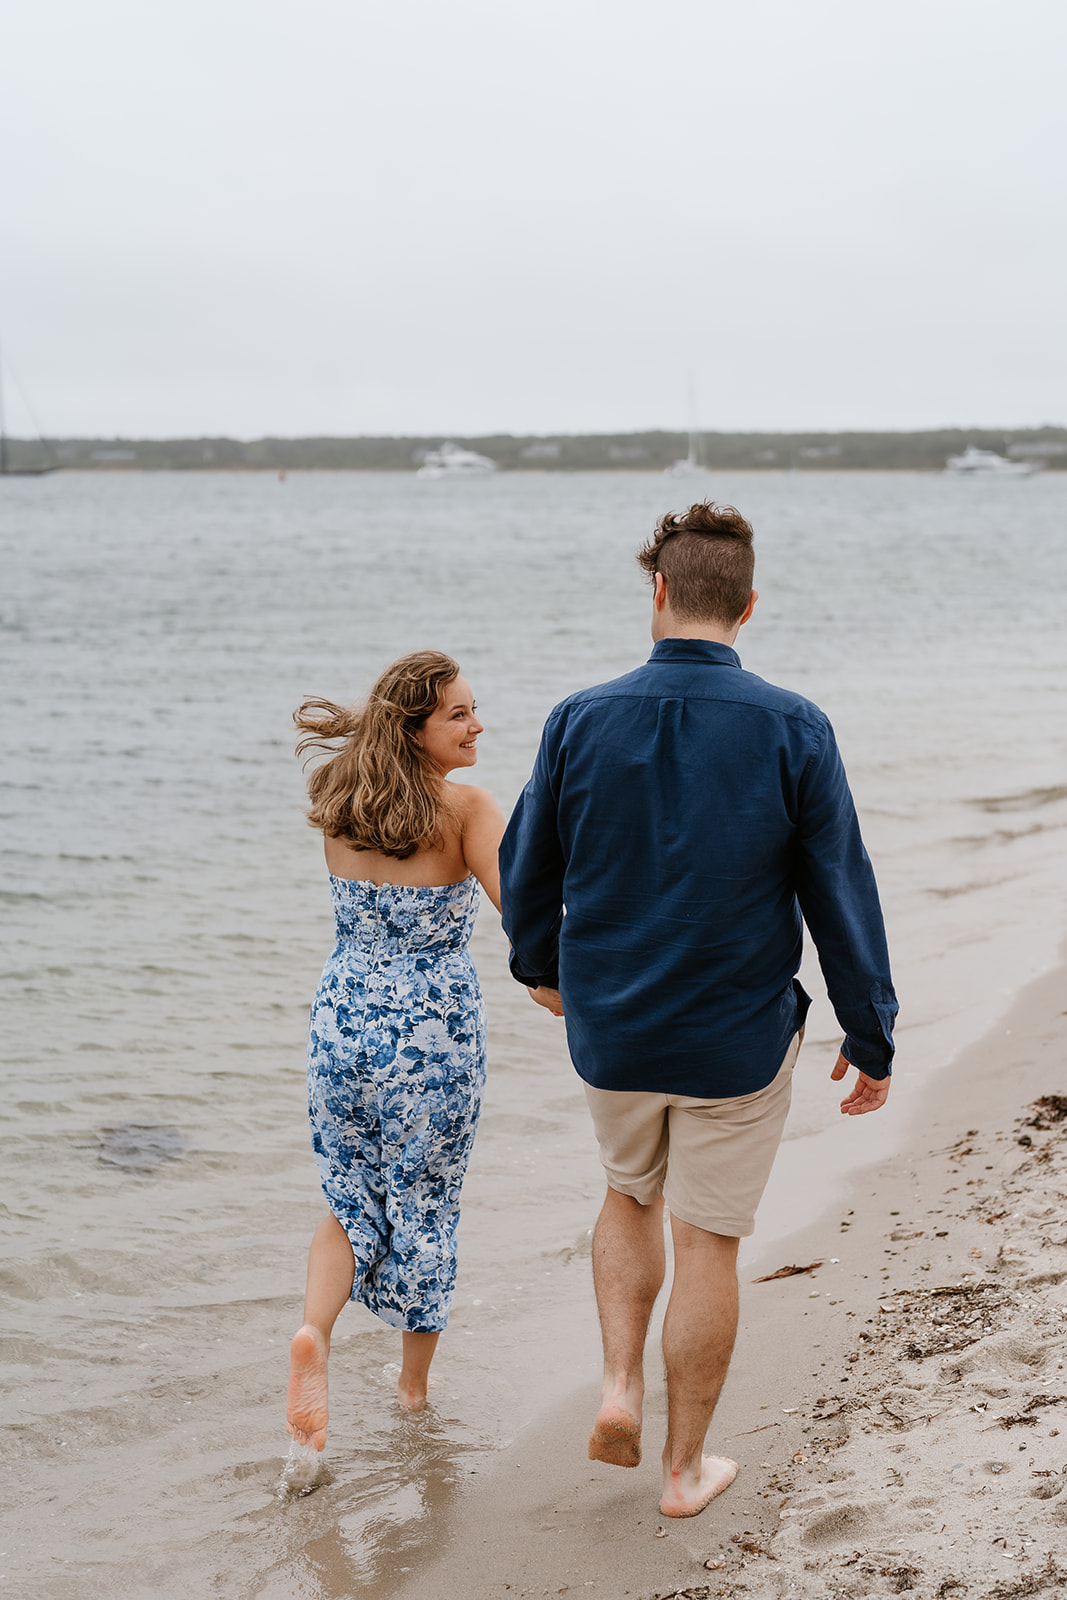 A couple holding hands and running barefoot along a sandy beach in Martha's VIneyard with boats in the background.